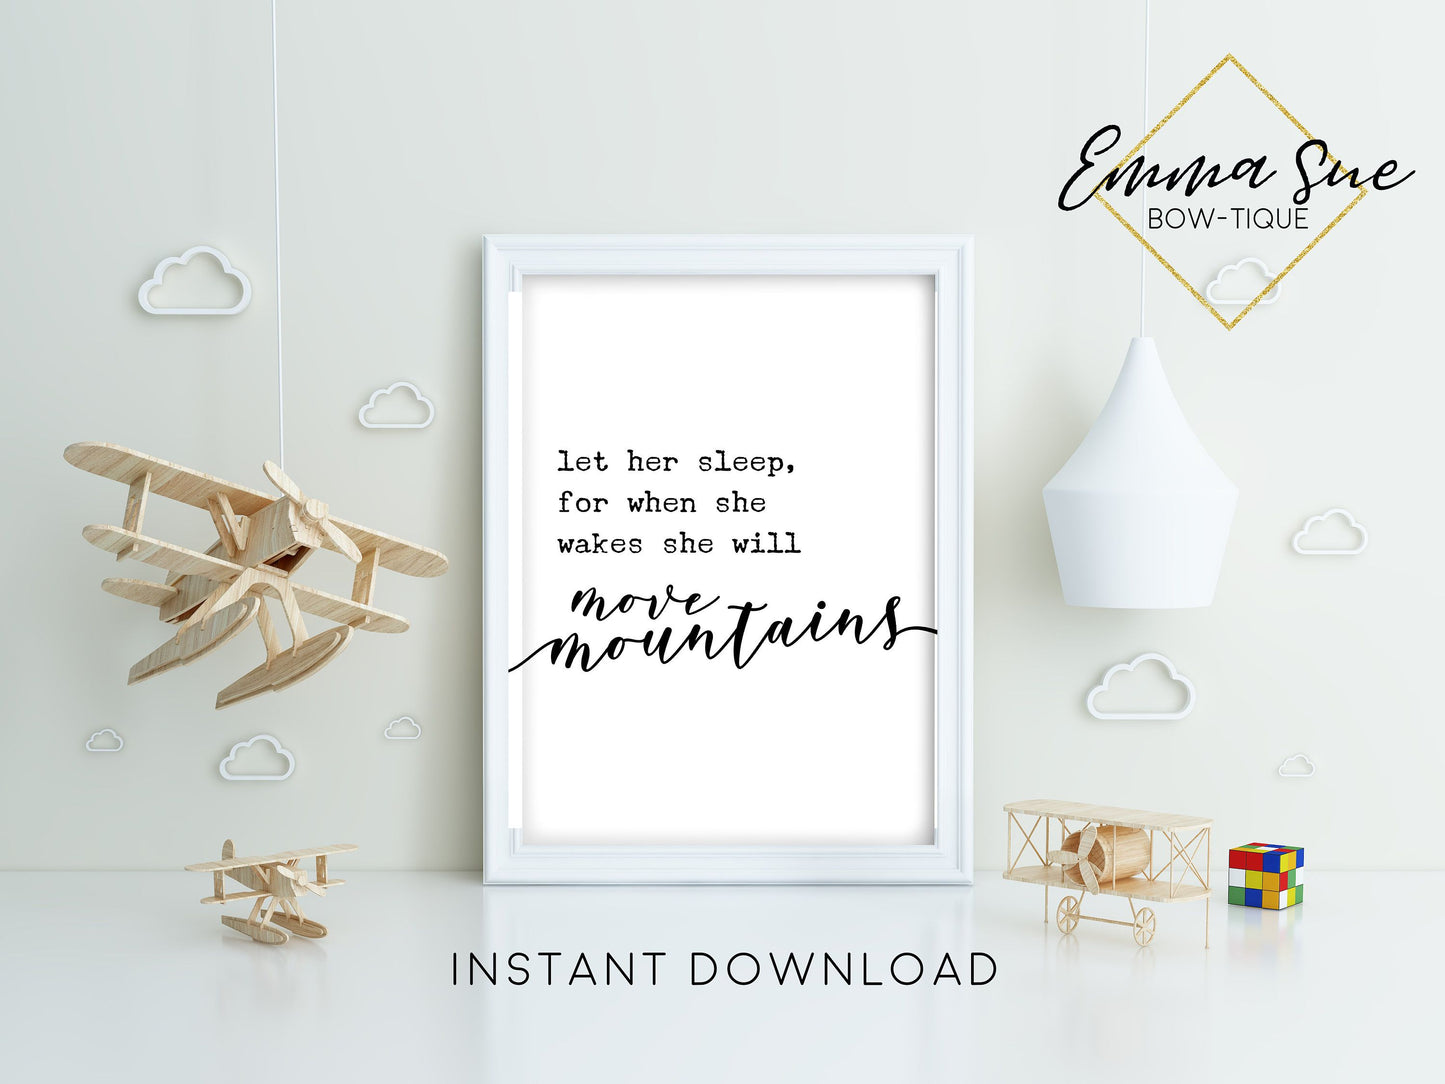 Let her sleep for when she wakes she will move mountains - Kid's Nursery room Wall Art Printable Sign - Digital File